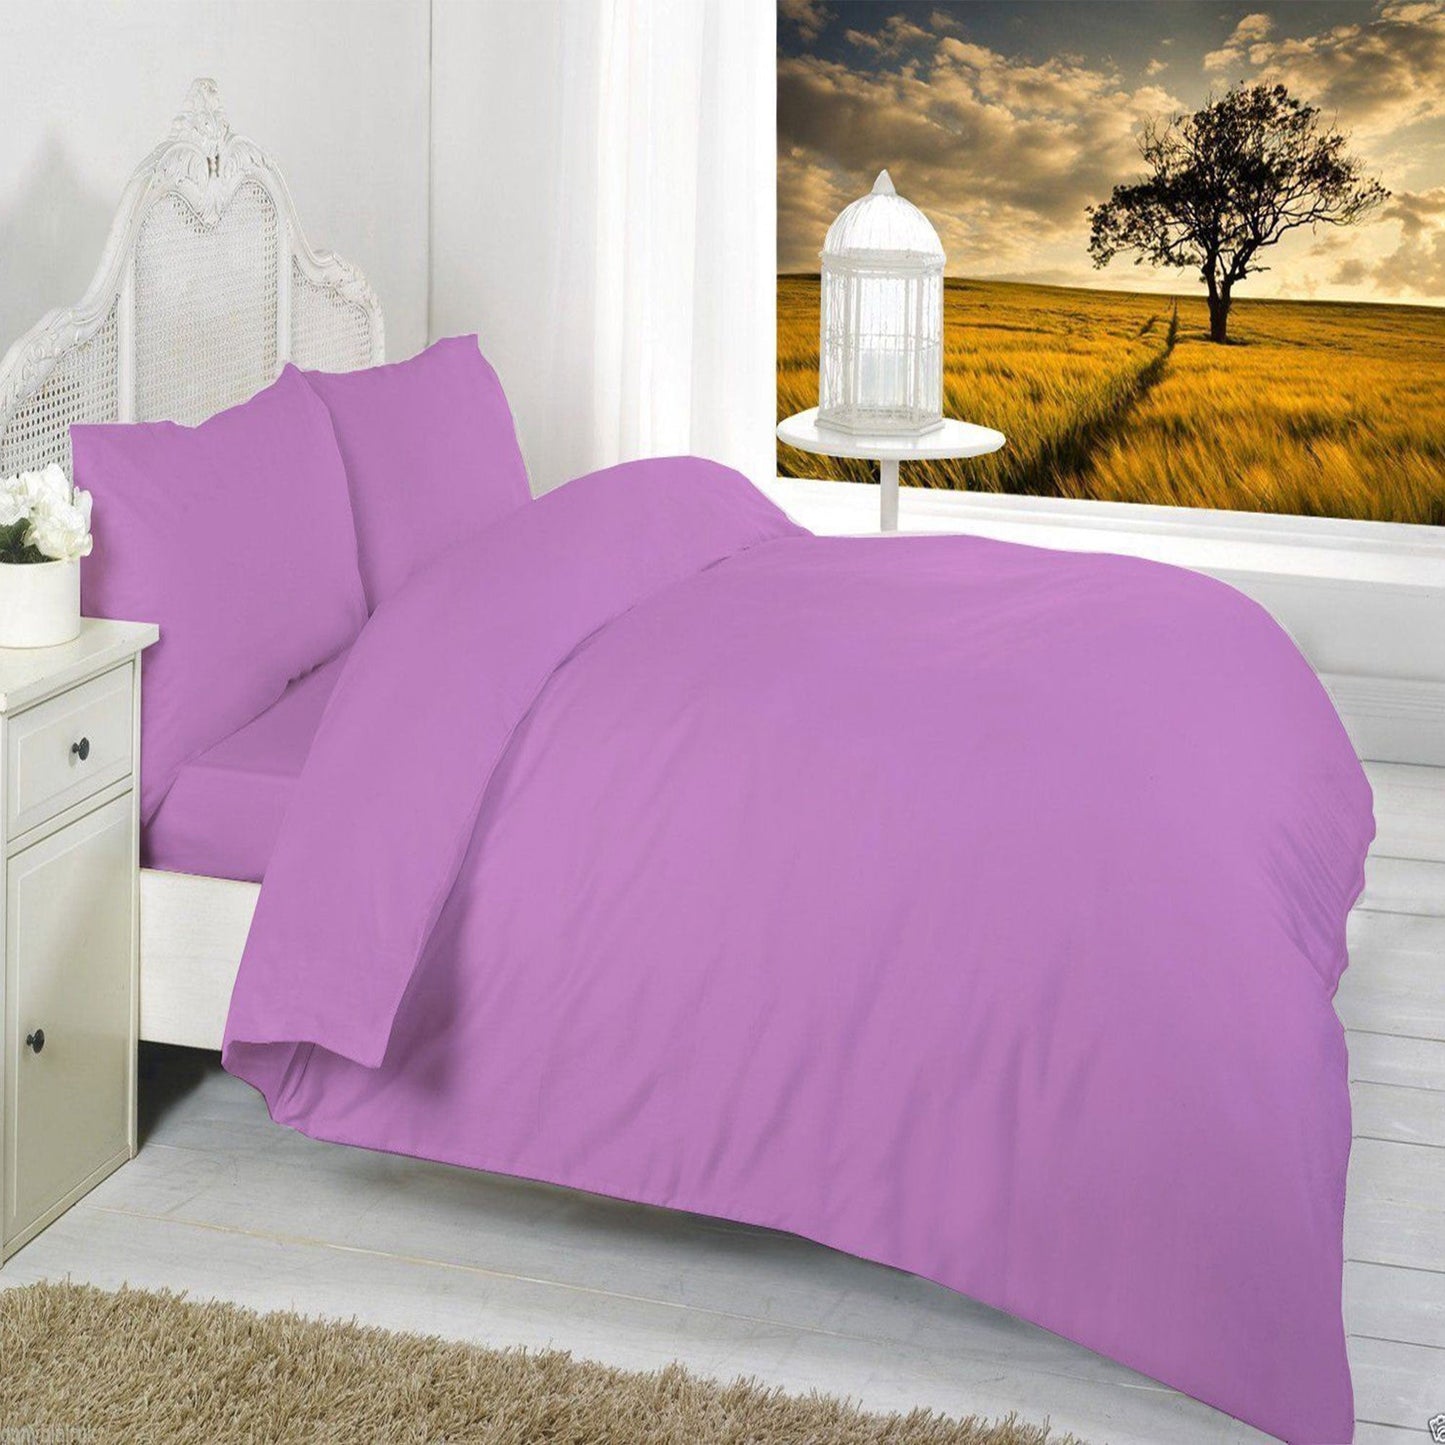 Egyptian Cotton T200 Duvet Cover Set In Several Sizes & Color, Pillow Cases Sold Separately - TheComfortshop.co.ukDuvet Covers0721718961925thecomfortshopTheComfortshop.co.ukLilac T200 Duvet SingleLilacSingleEgyptian Cotton T200 Duvet Cover Set In Several Sizes & Color, Pillow Cases Sold Separately - TheComfortshop.co.uk